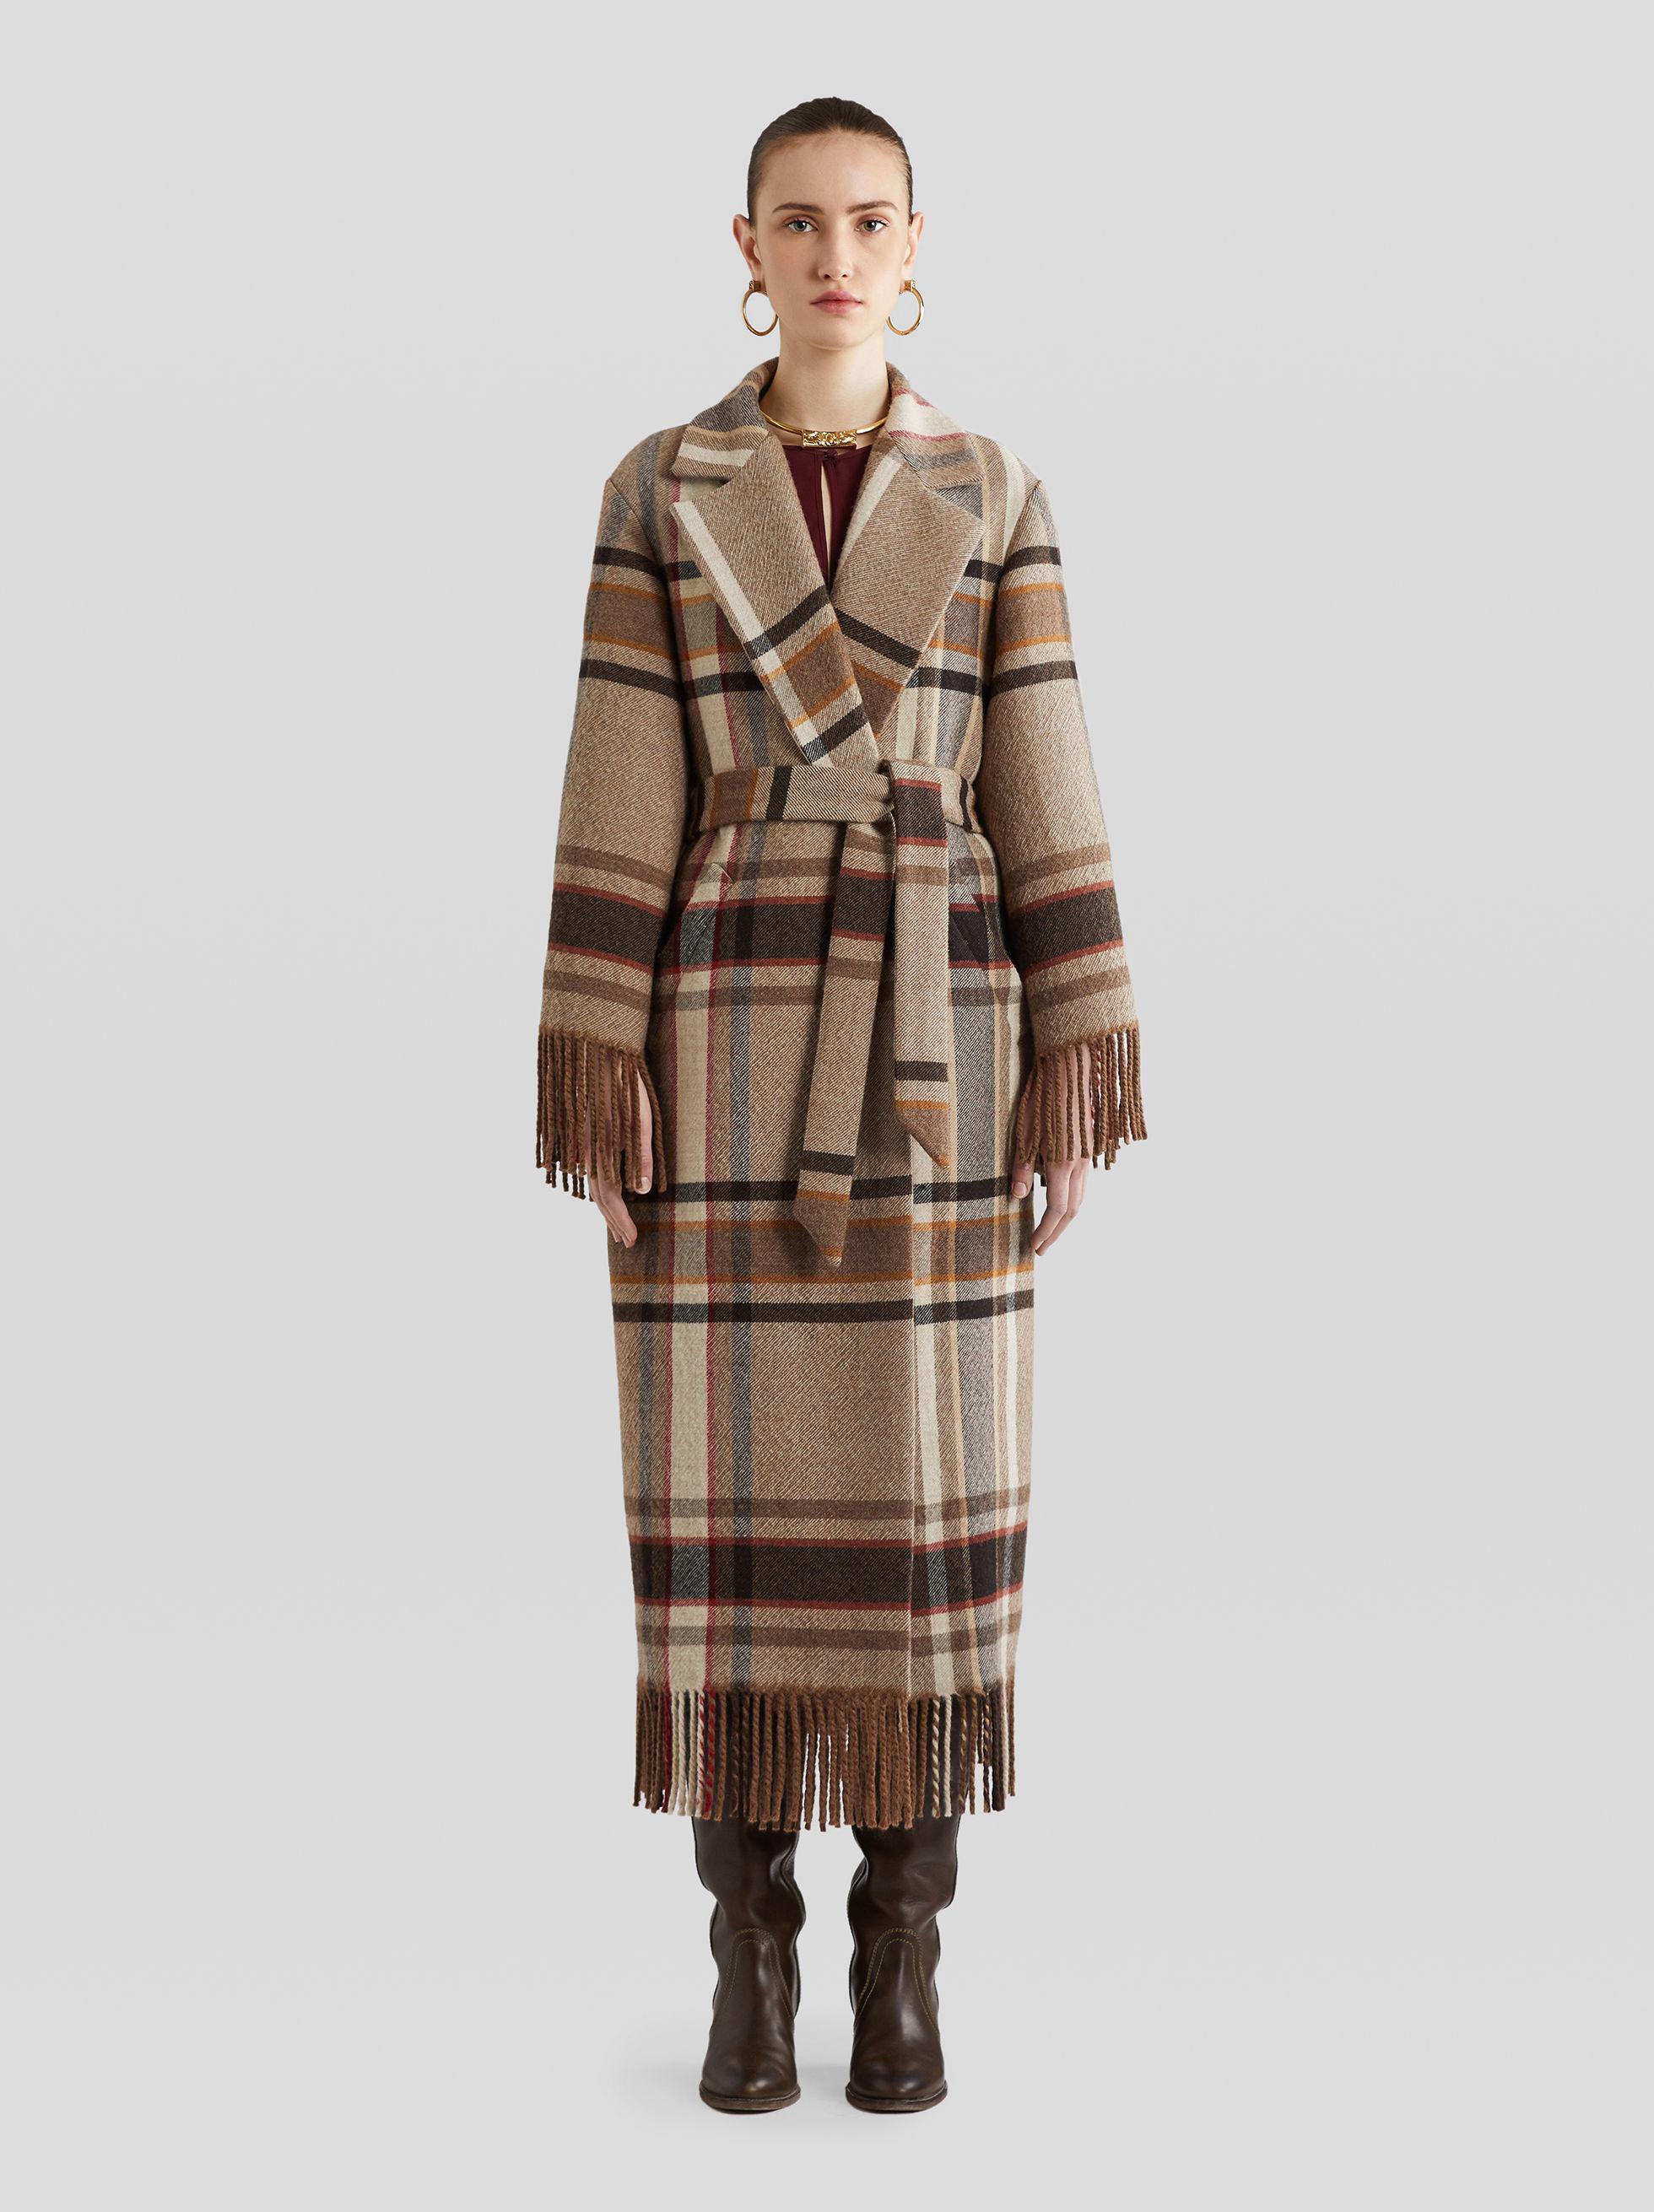 Etro Check Wool Coat With Fringe in Brown | Lyst